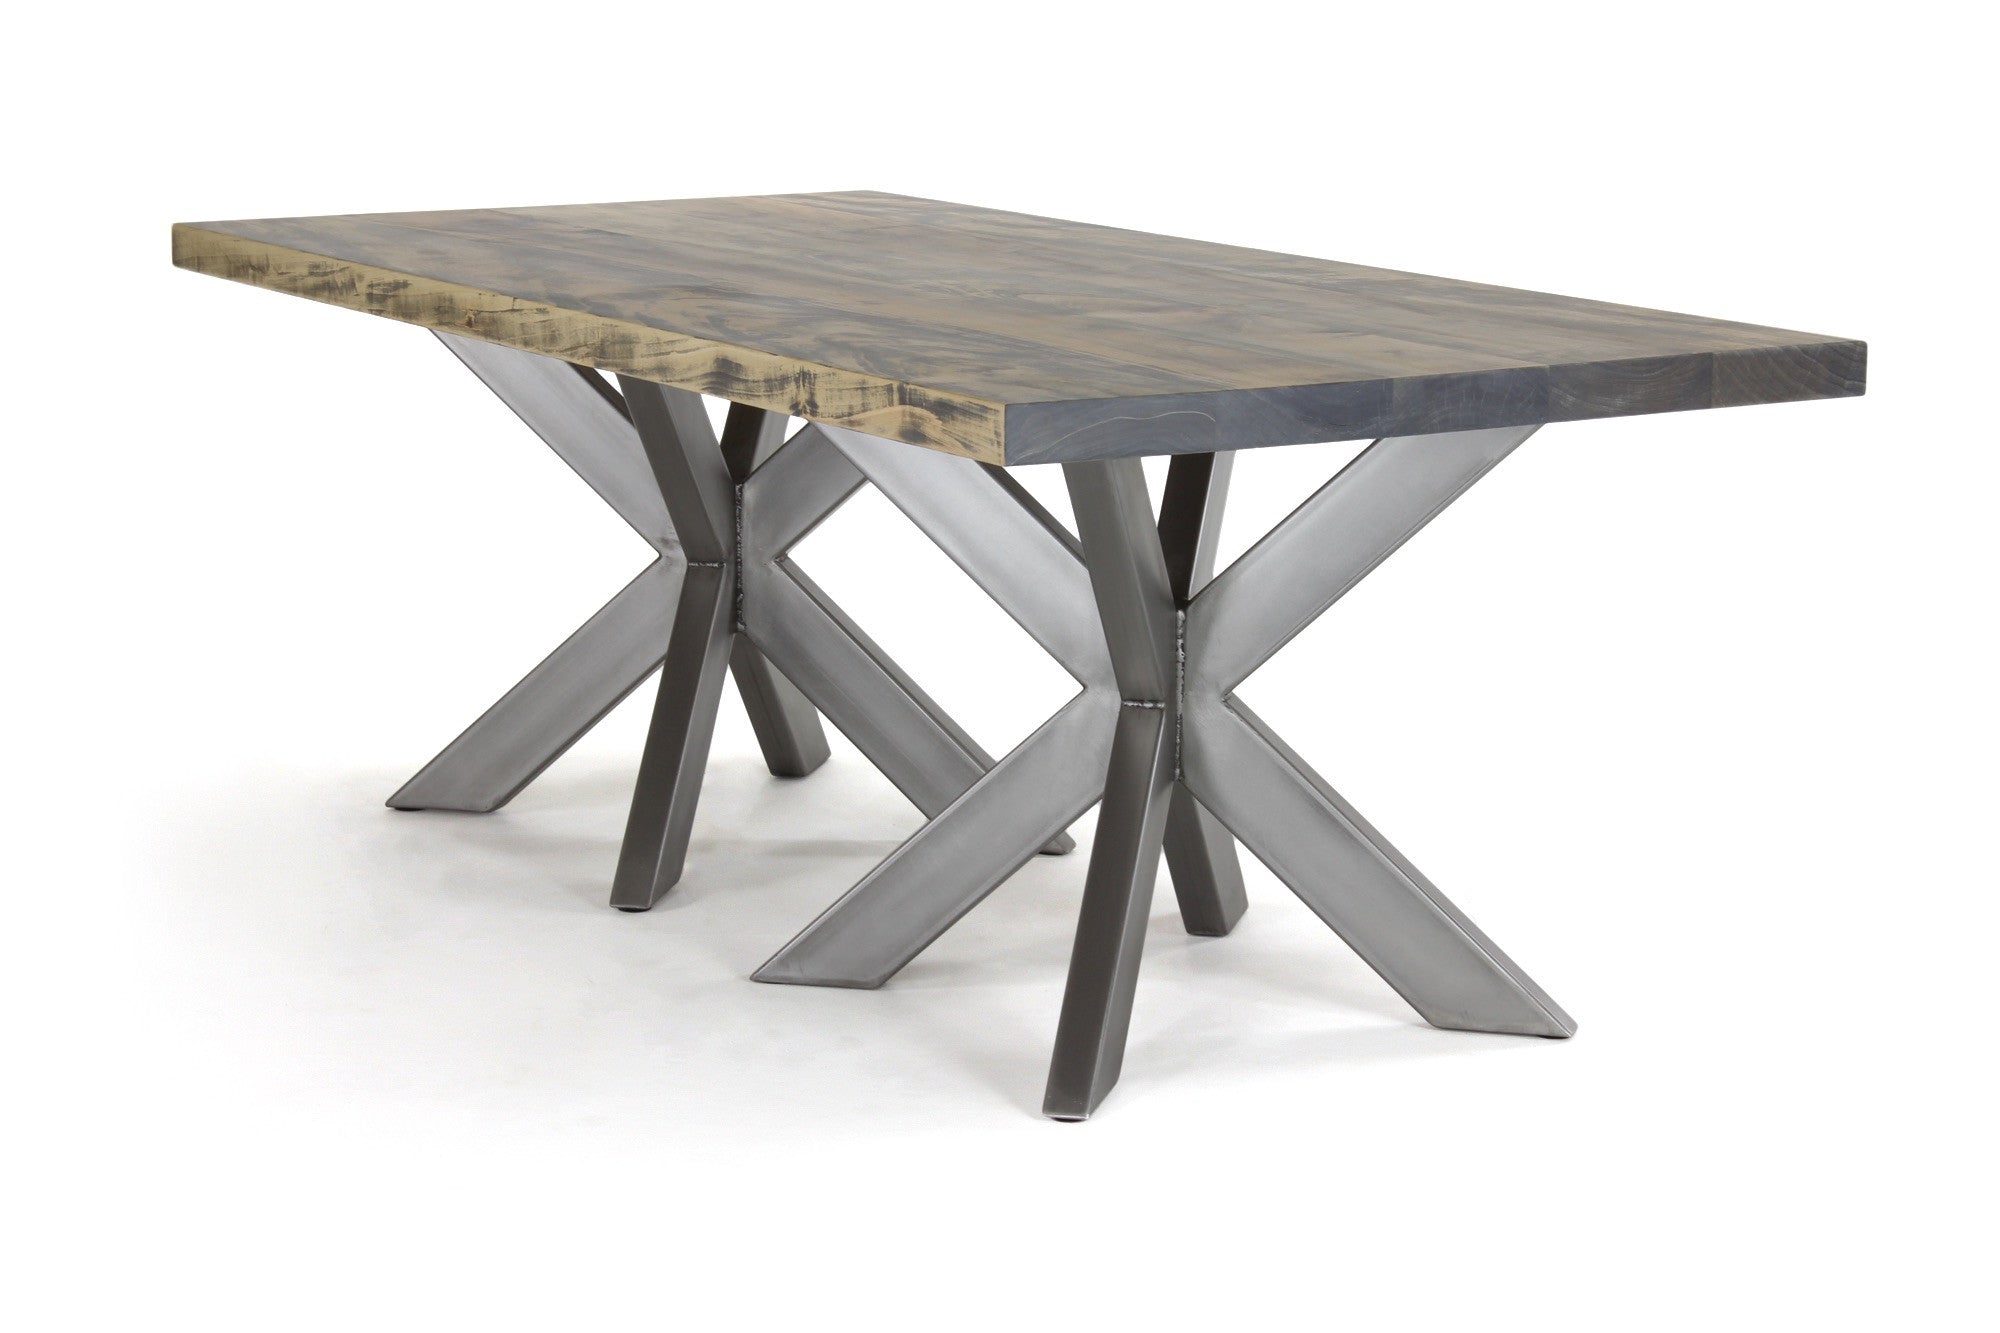 7' double jak dining table | worn maple wood finish with stainless steel